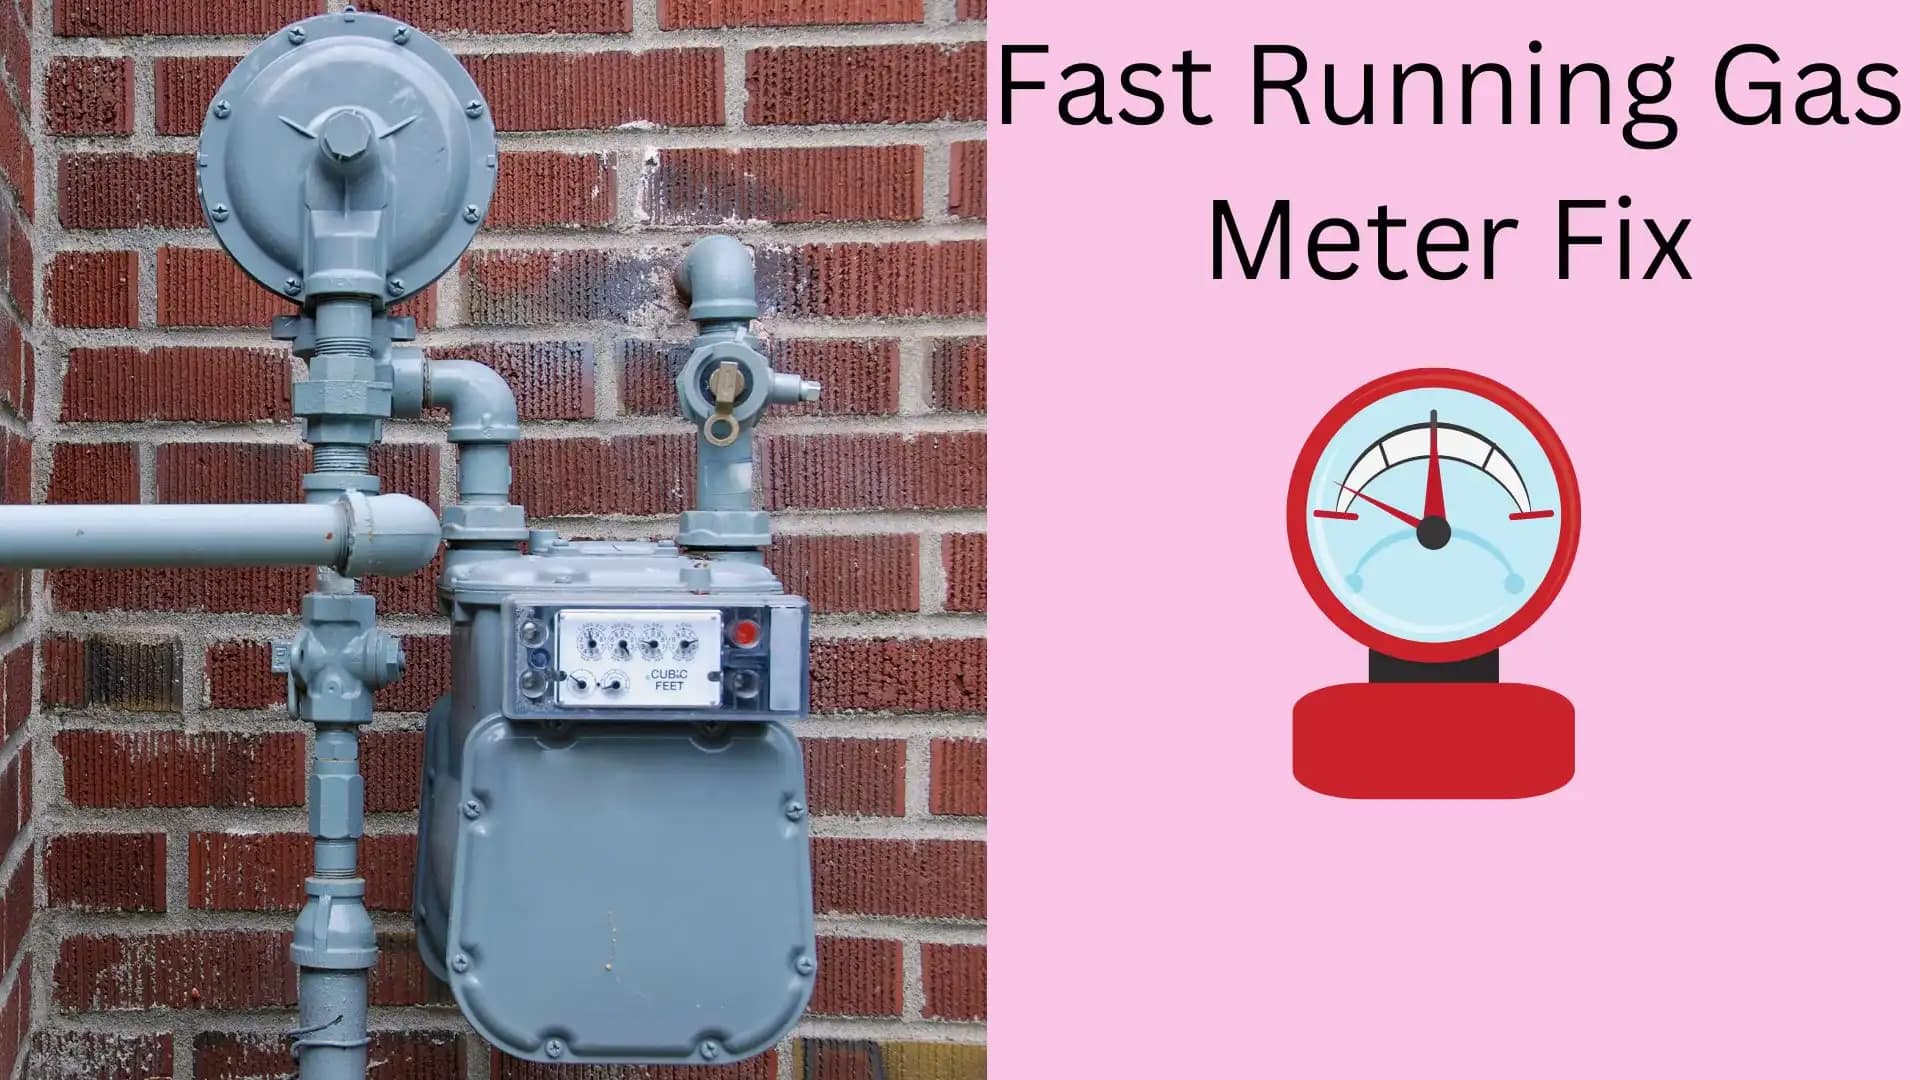 Baron Boodschapper orkest Slow Down The Fast Running Gas Meter - Causes And Solutions - Smart meter  Qna